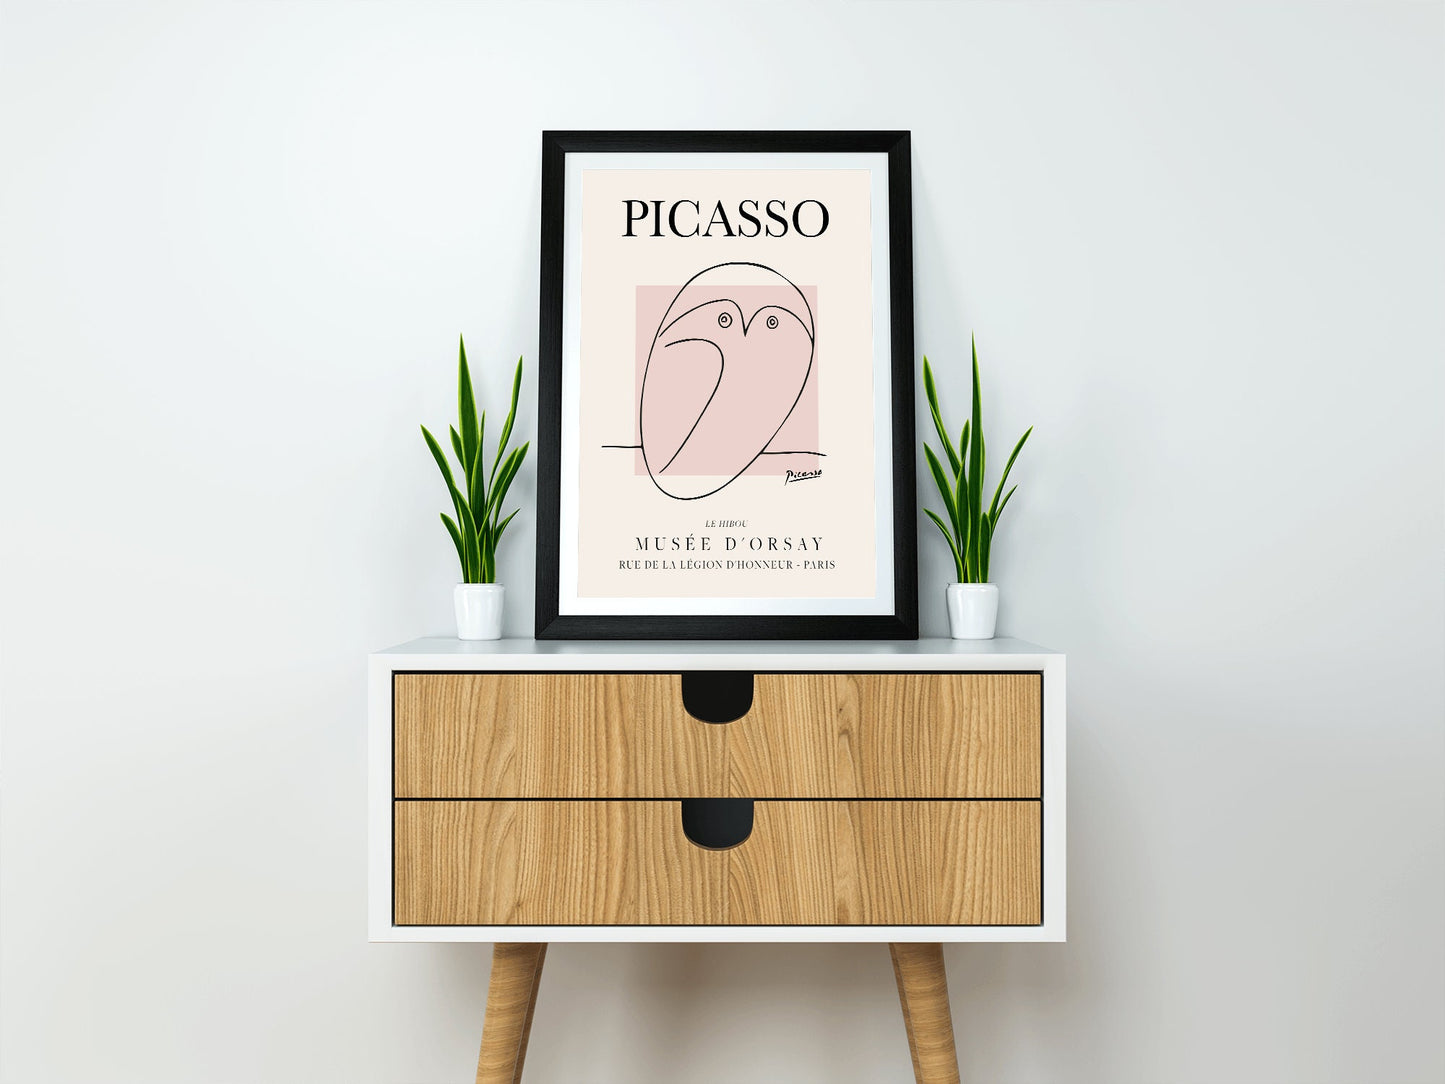 Picasso - The Owl, Exhibition Vintage Line Art Poster, Minimalist Line Drawing, Ideal Home Decor or Gift Print